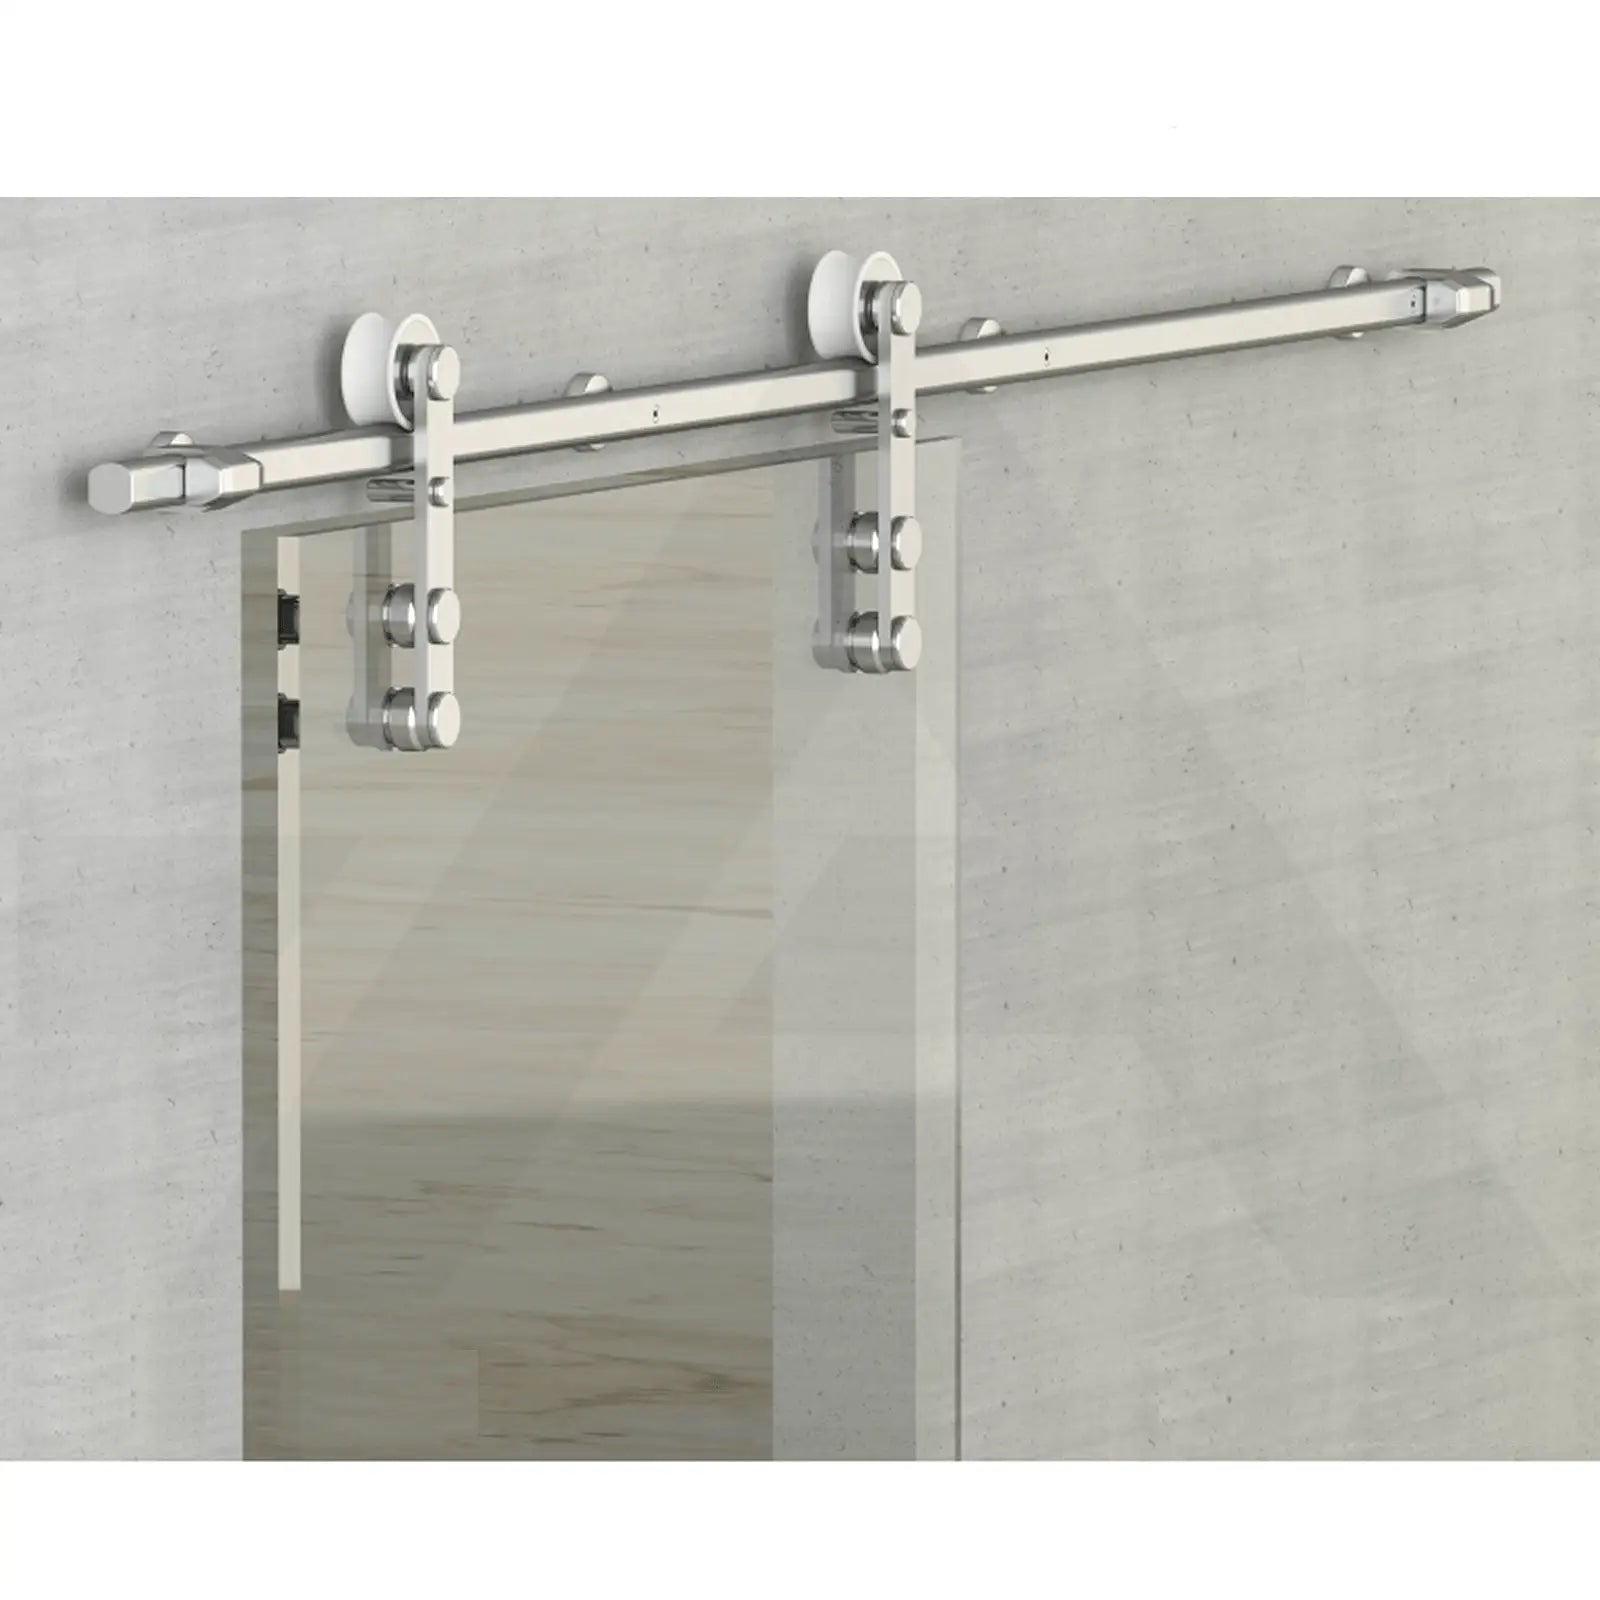 High Quality 1700mm / 2000mm Silver Sliding Glass Door Track System - Decor And Decor